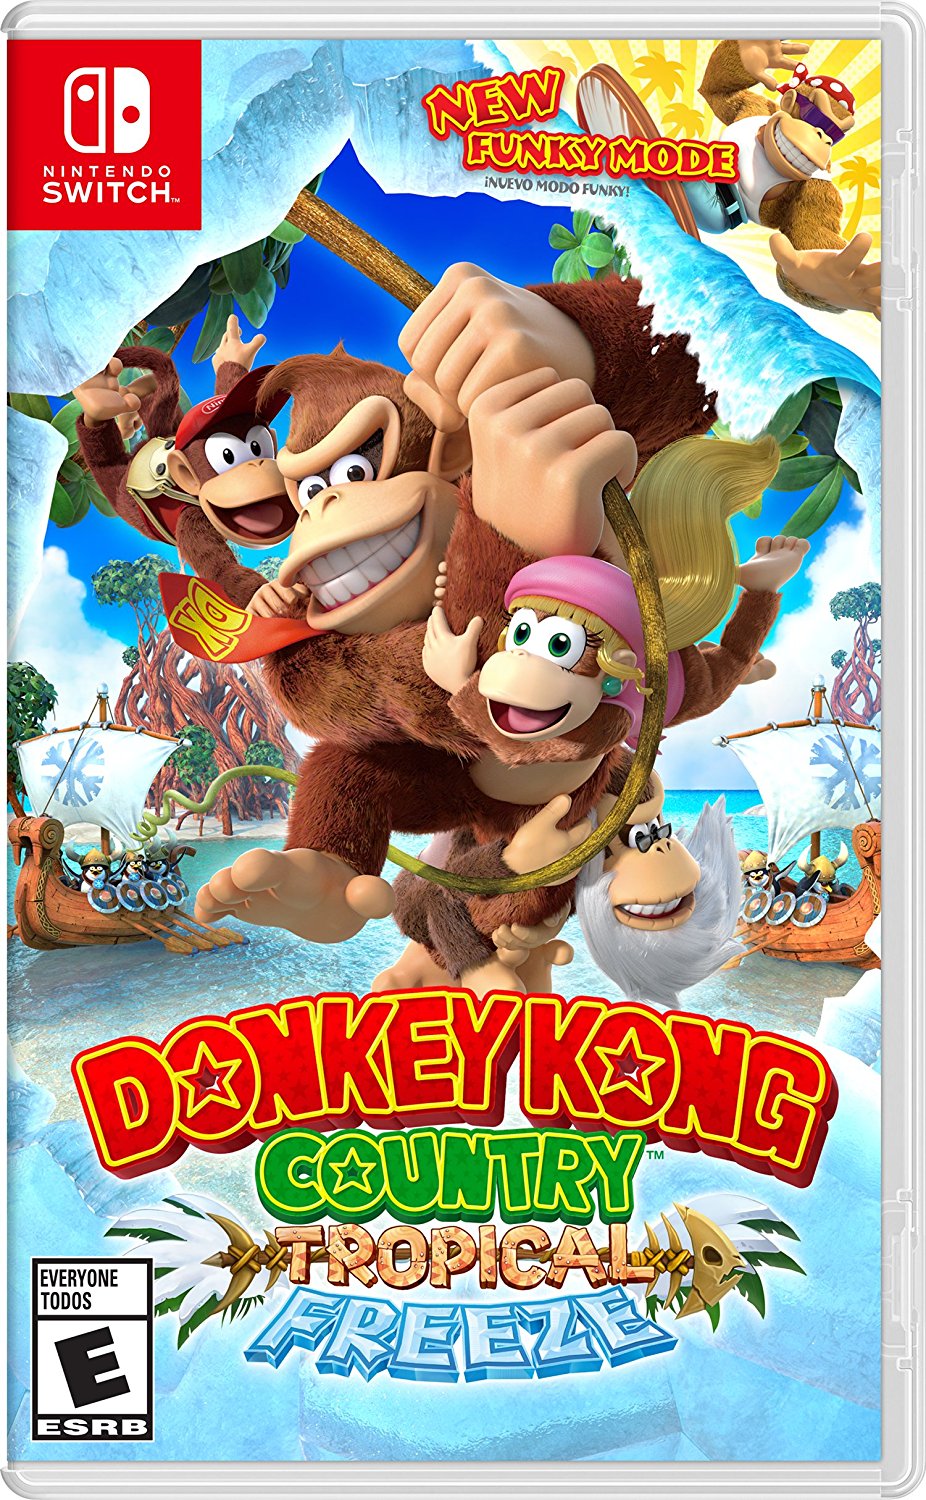 download donkey kong country 64 switch